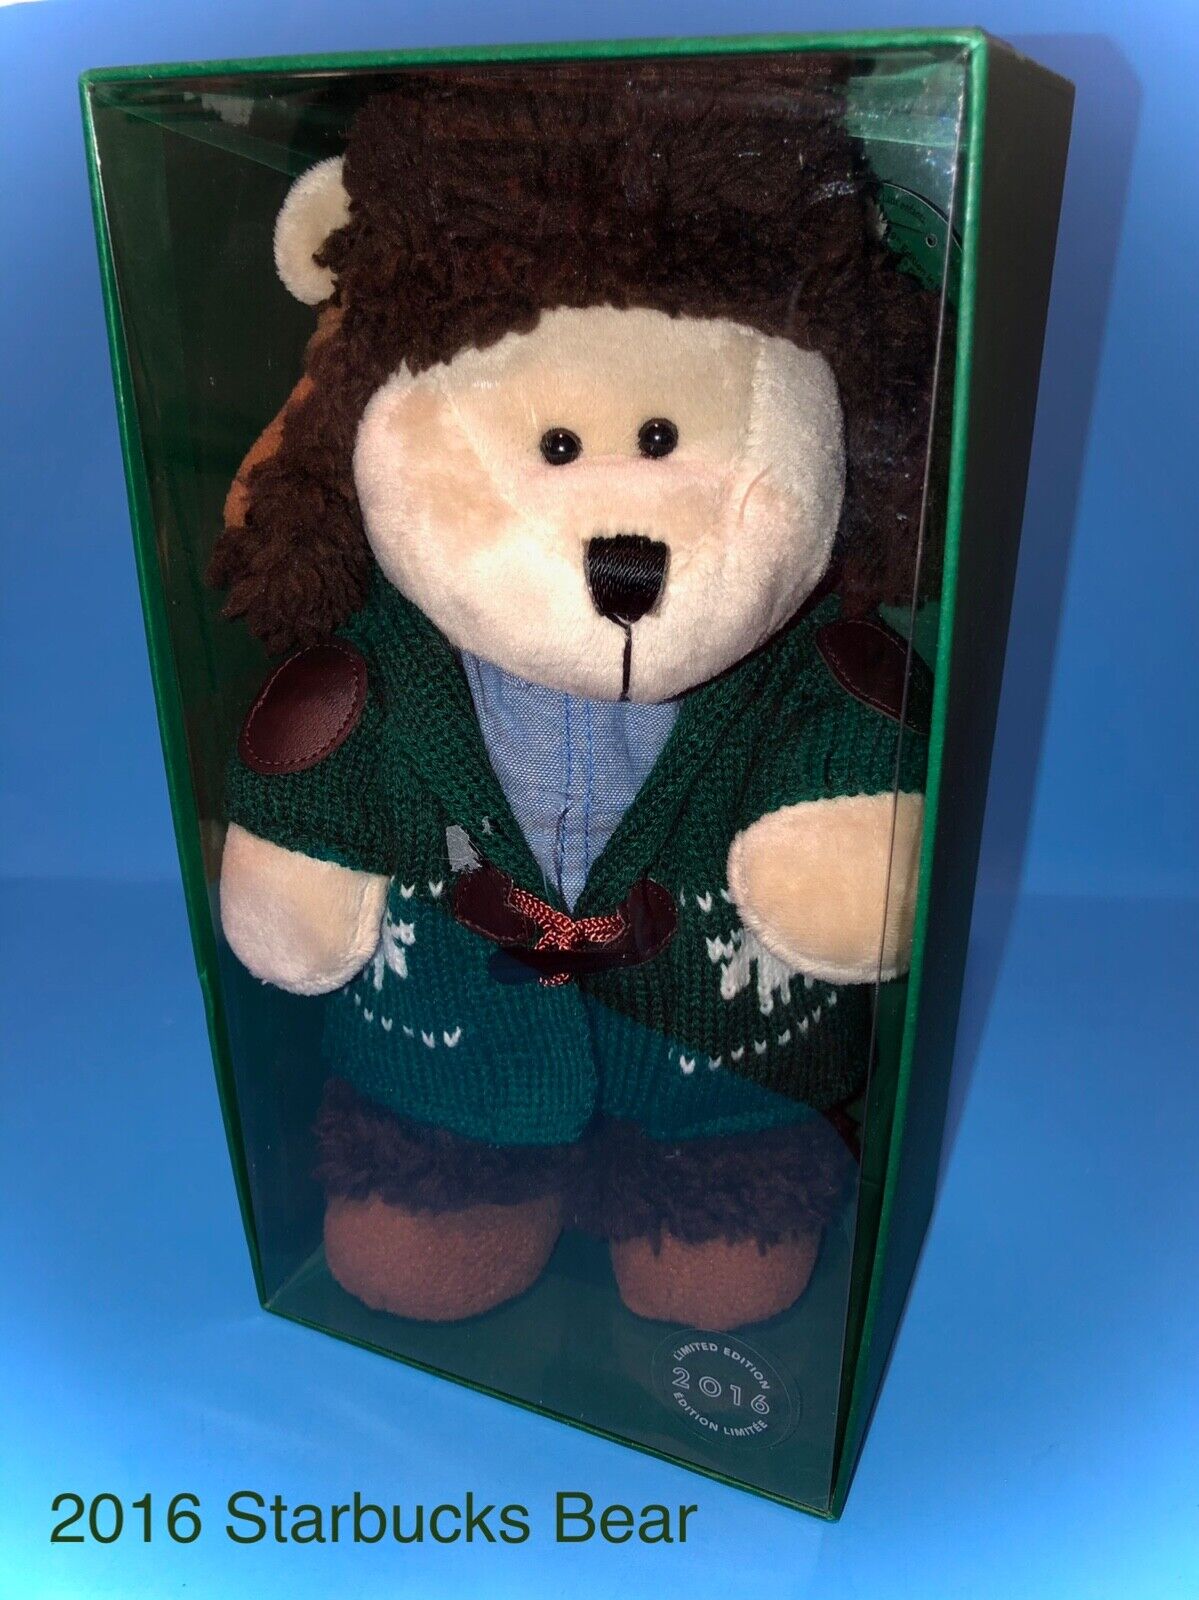 Starbucks Bearista 2016 - Home for the Holidays - New in Box bear